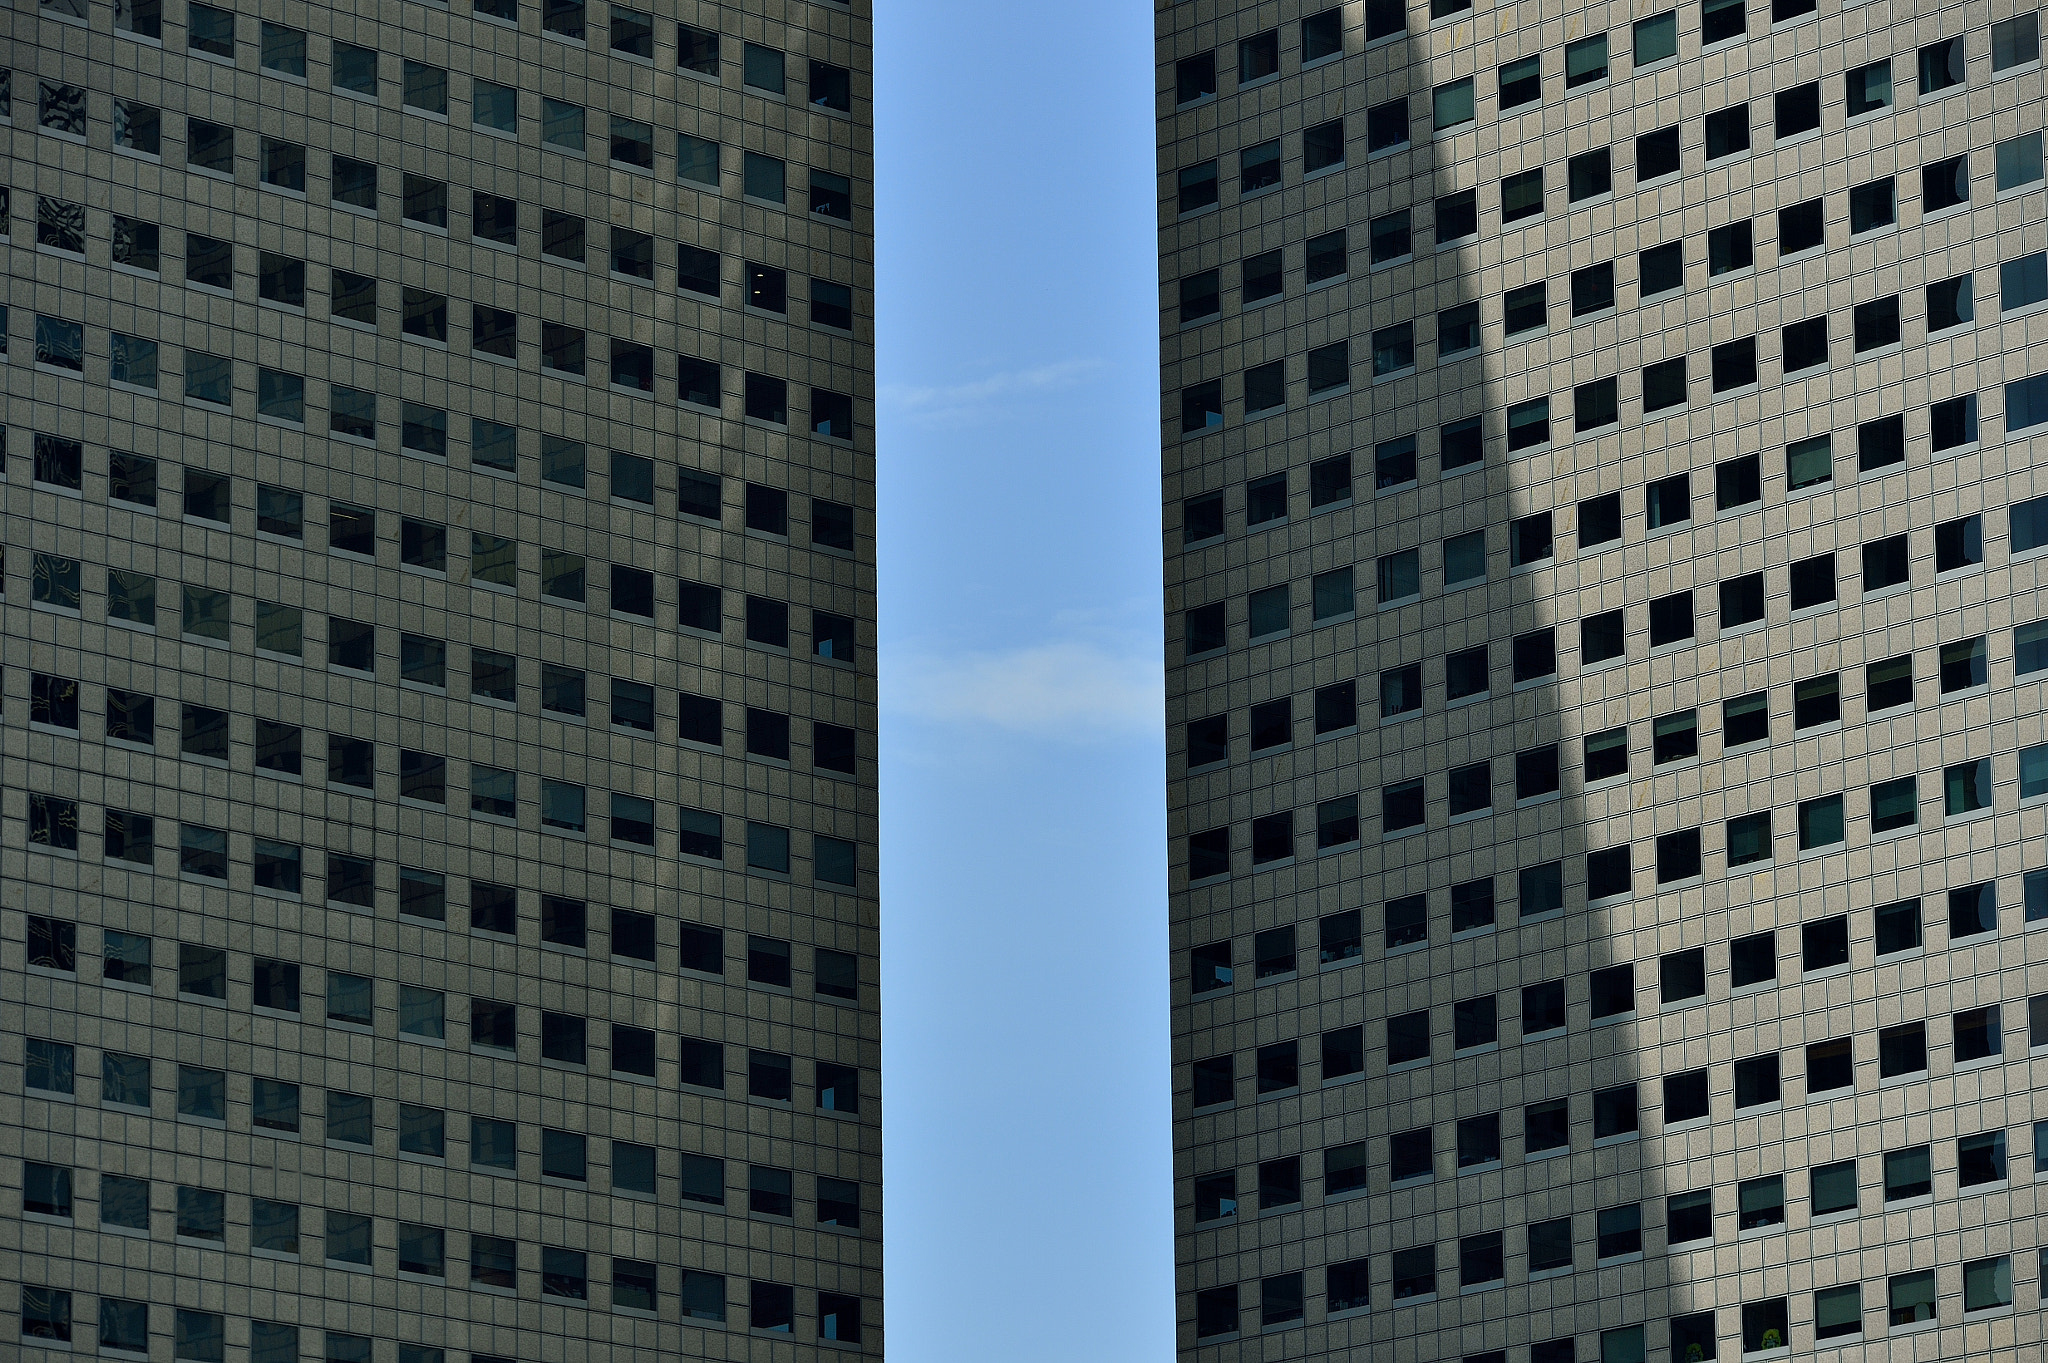 General 2048x1363 urban building skyscraper clear sky abstract